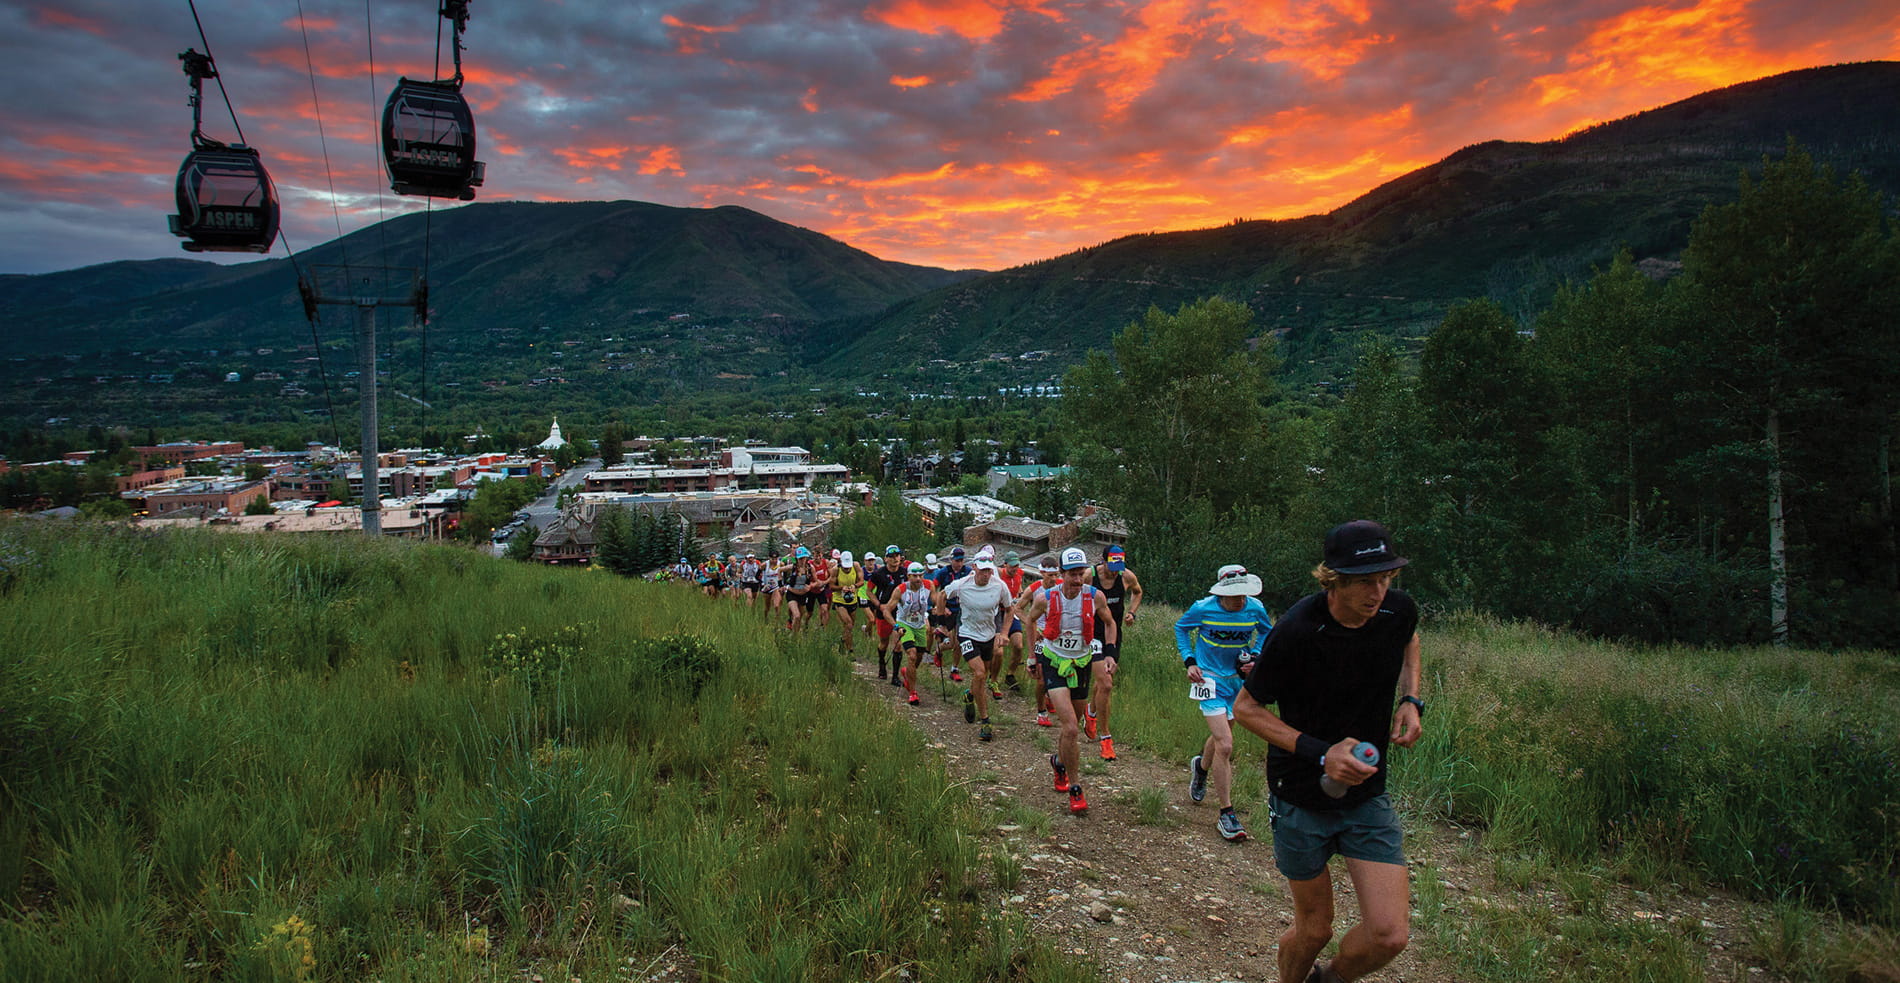 Runners competing in the Audi Power of Four trail race in Aspen Colorado.